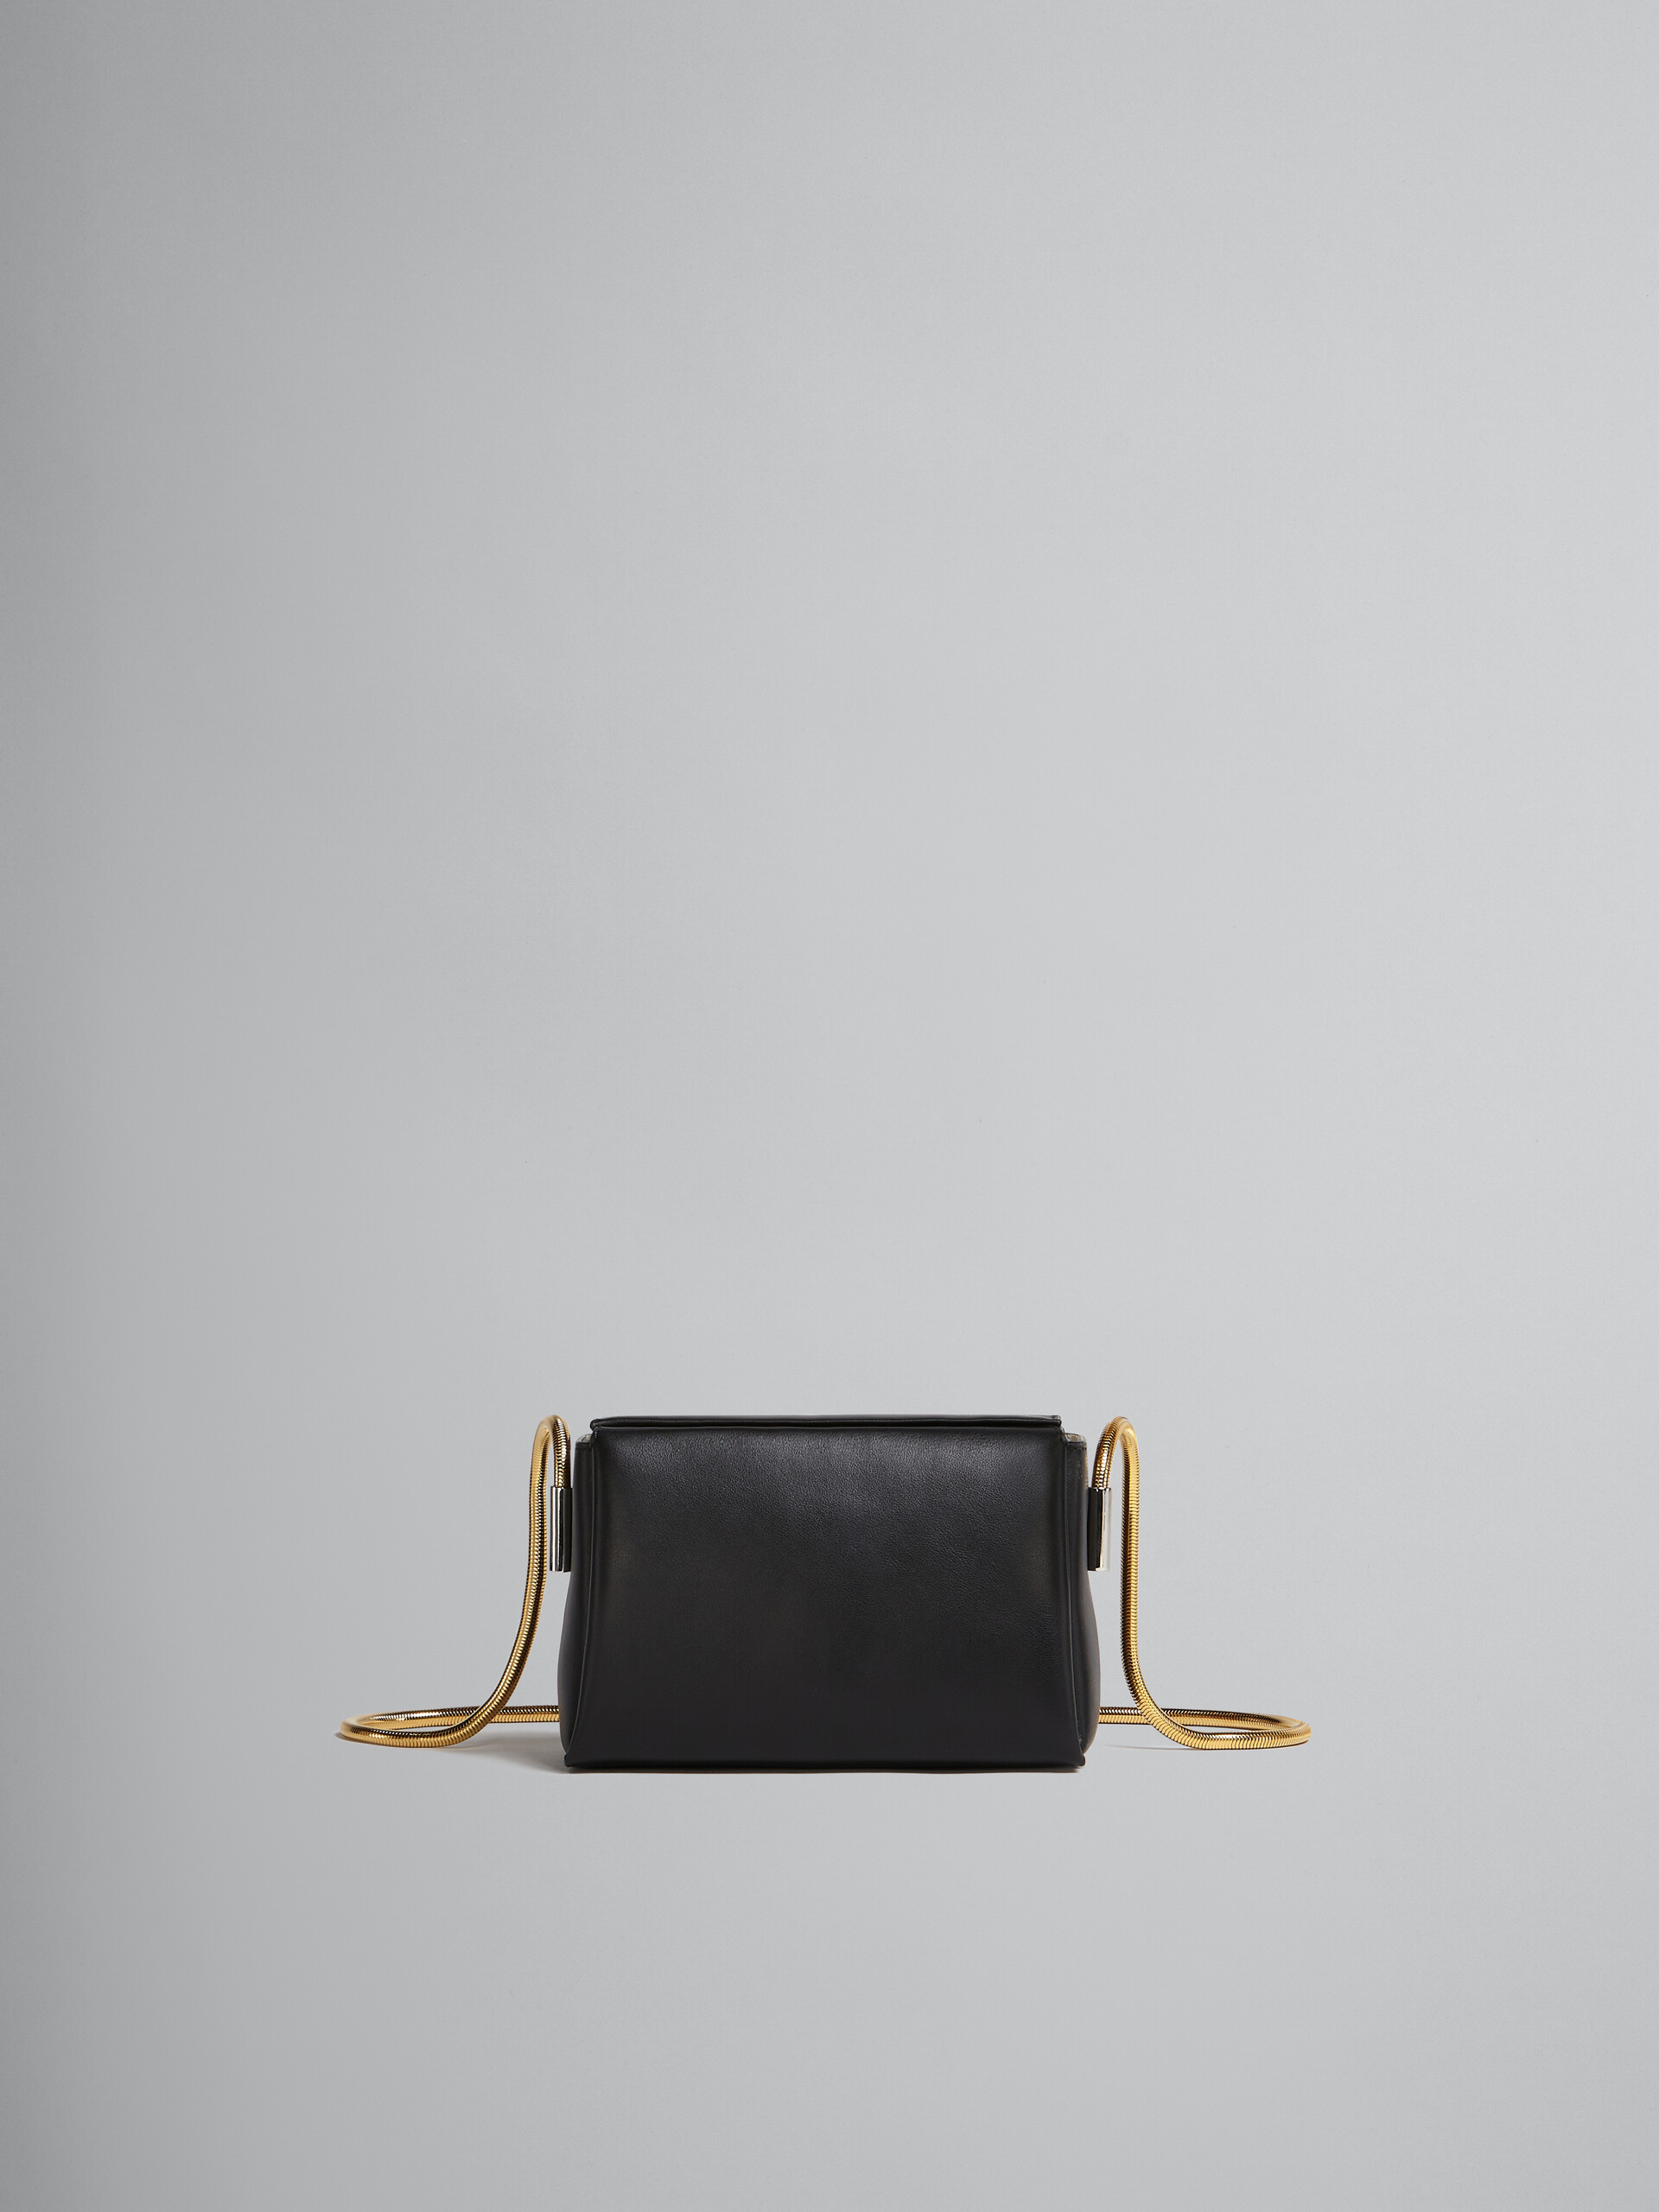 Toggle Small Bag in black leather - Shoulder Bags - Image 1